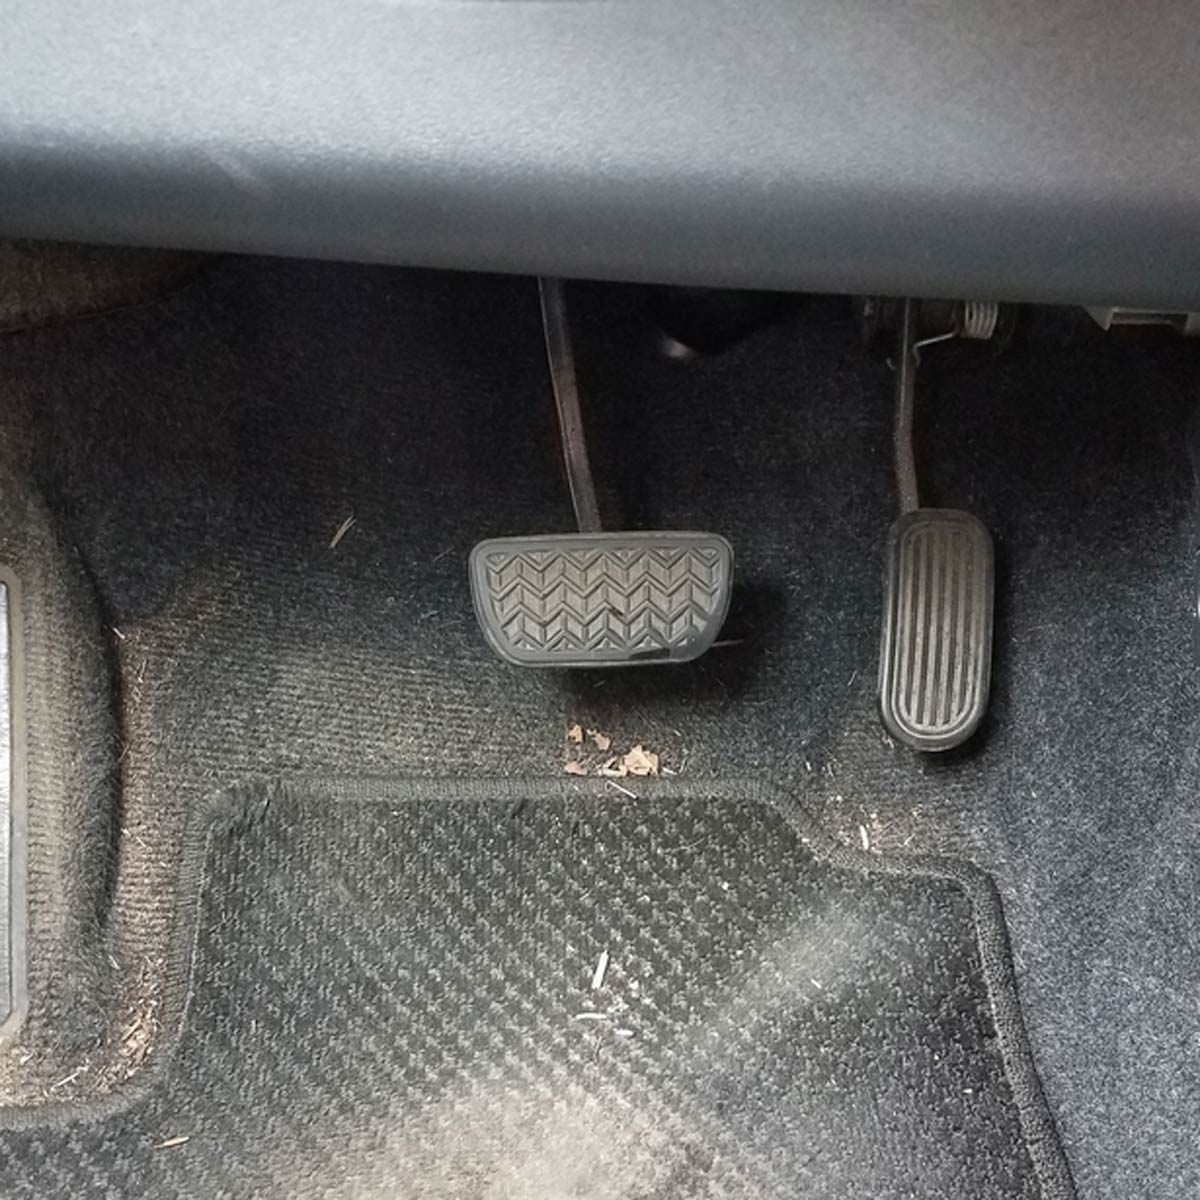 The Best Way to Get Sand Out of Your Car